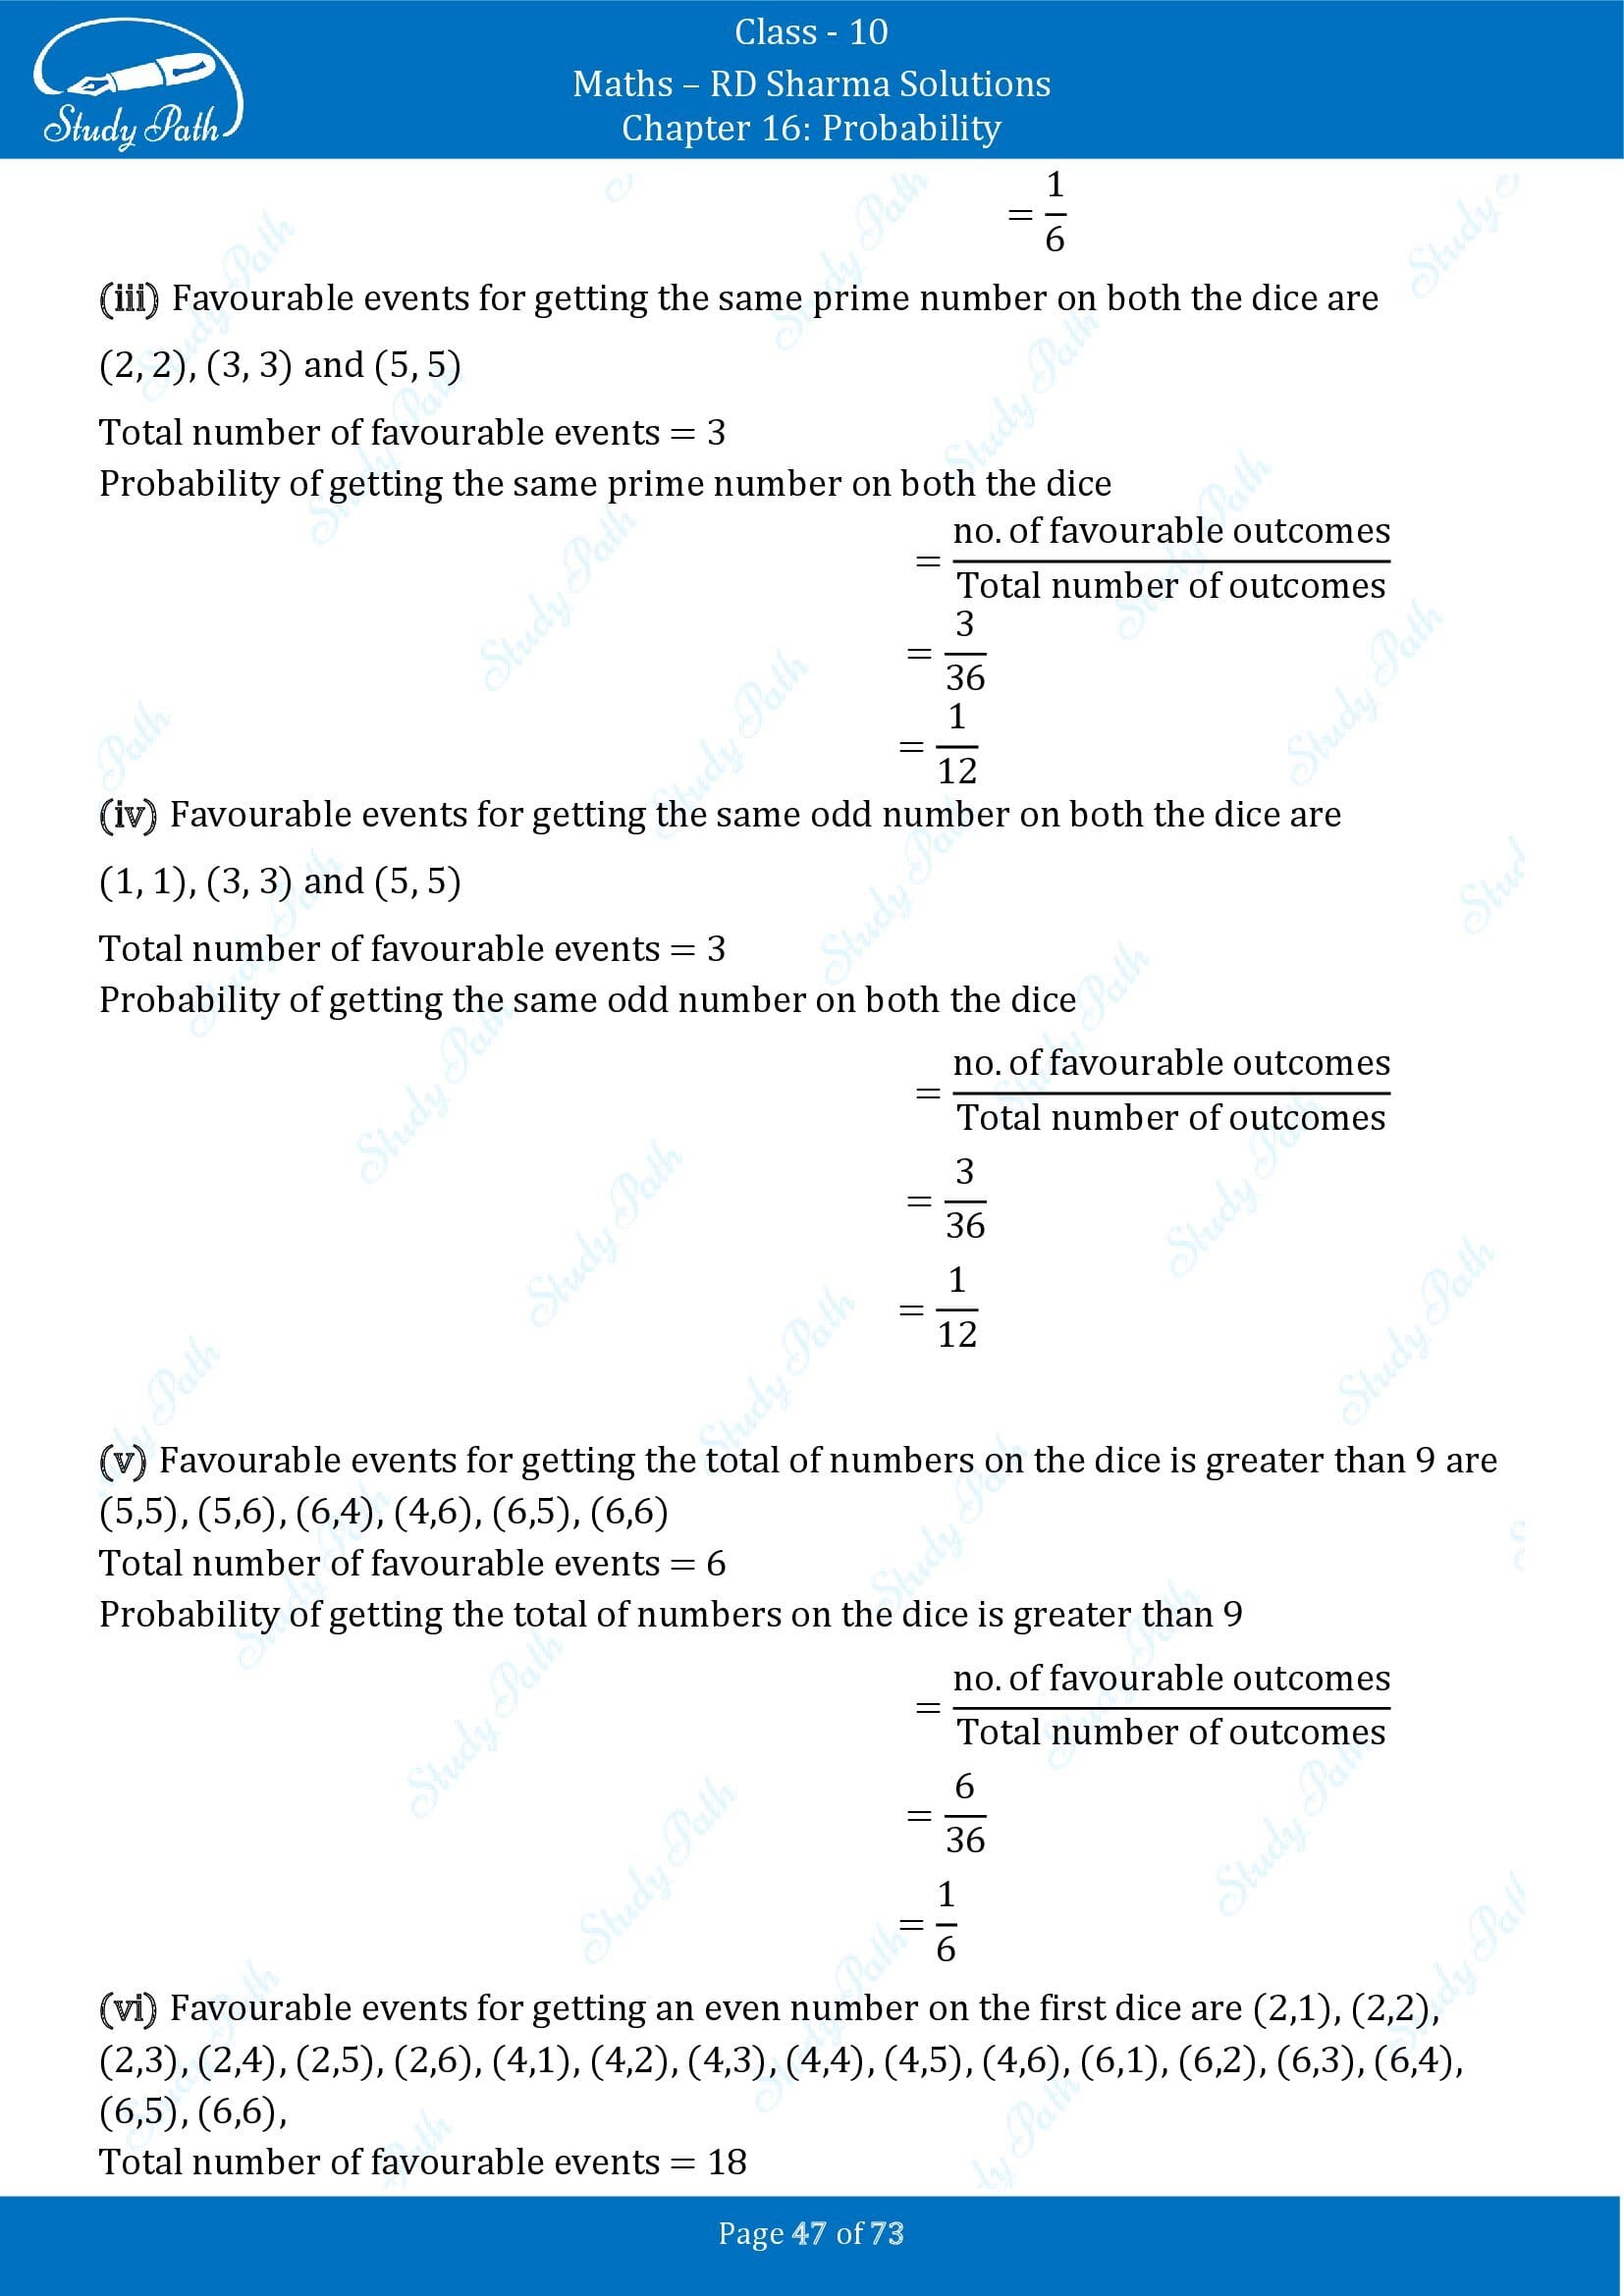 RD Sharma Solutions Class 10 Chapter 16 Probability Exercise 16.1 00047